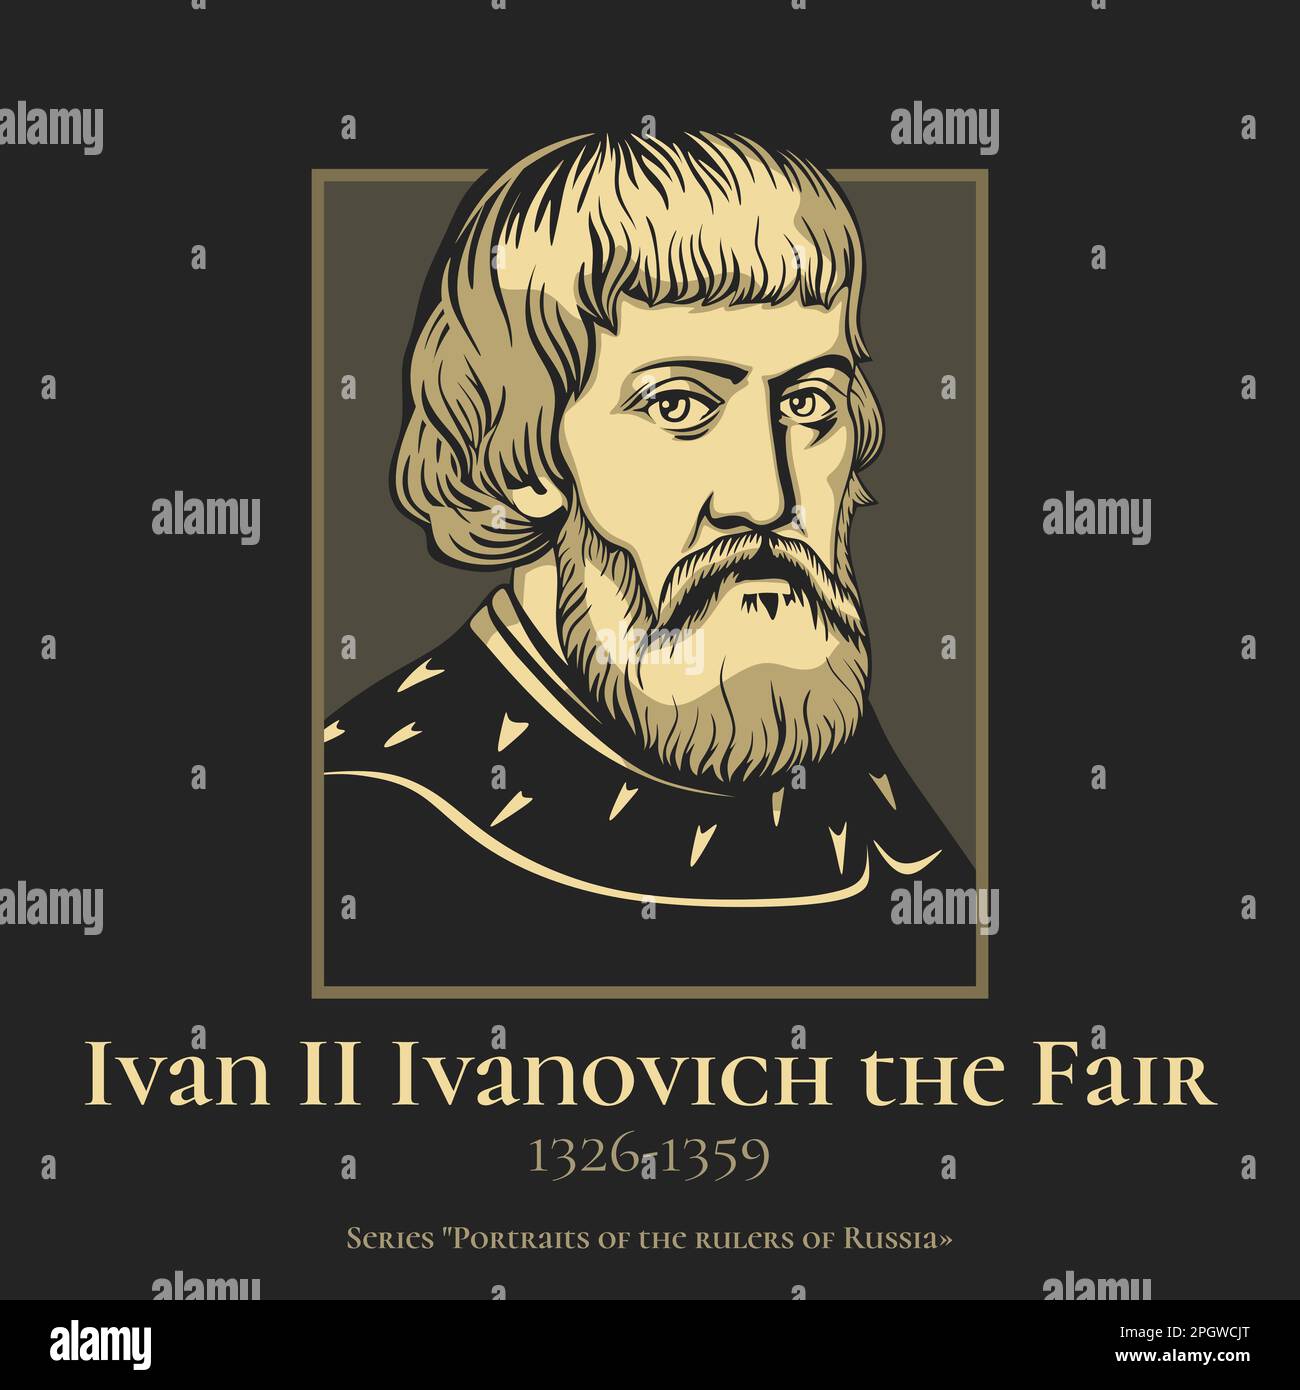 Ivan II Ivanovich the Fair (1326-1359) was the Grand Prince of Moscow and Grand Prince of Vladimir in 1353. Stock Vector